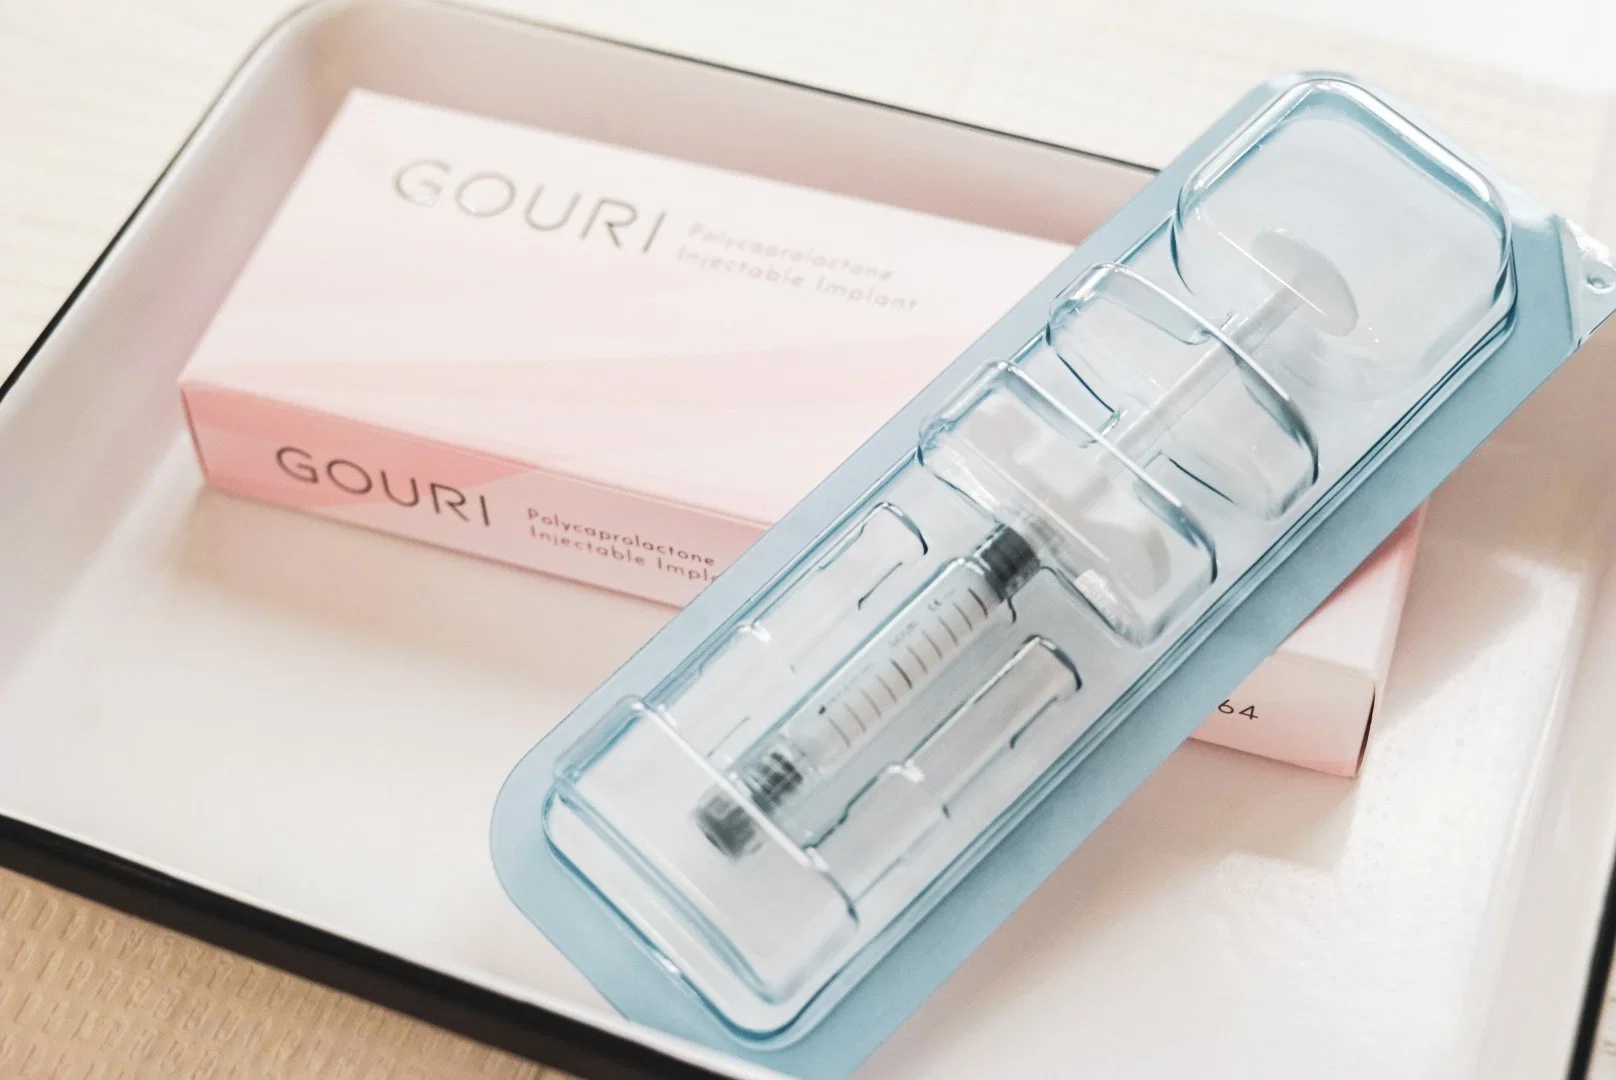 Gouri Filler Goiri Dermal Filler The First Injectable Liquid Polycaprolactone Pcl Premium Collagen Stimulator Face Lift Anti Aging Wrinkles Removal Injection